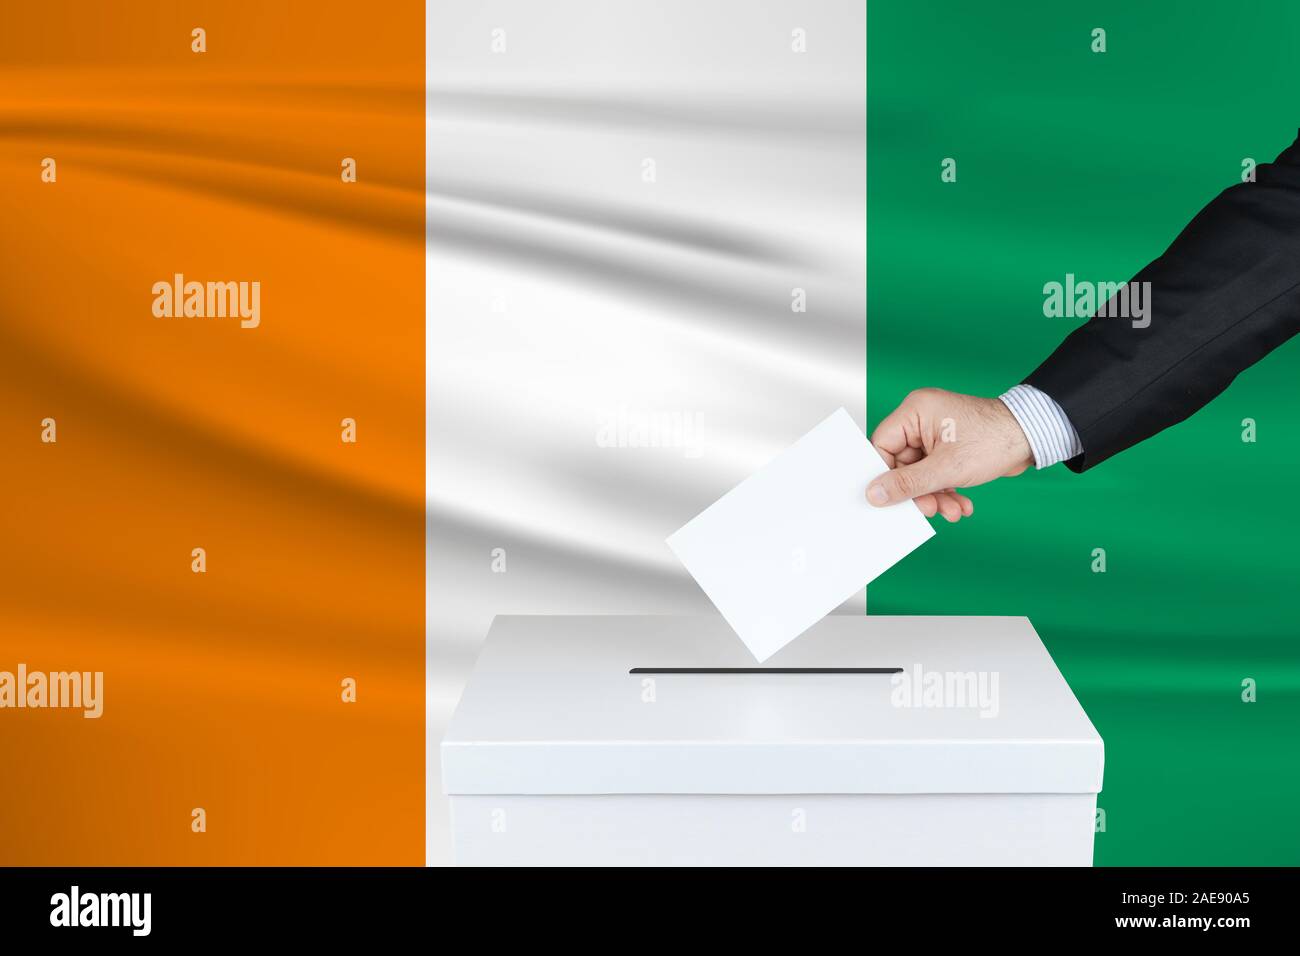 Election in Ireland. The hand of man putting his vote in the ballot box. Waved Ireland flag on background. Stock Photo